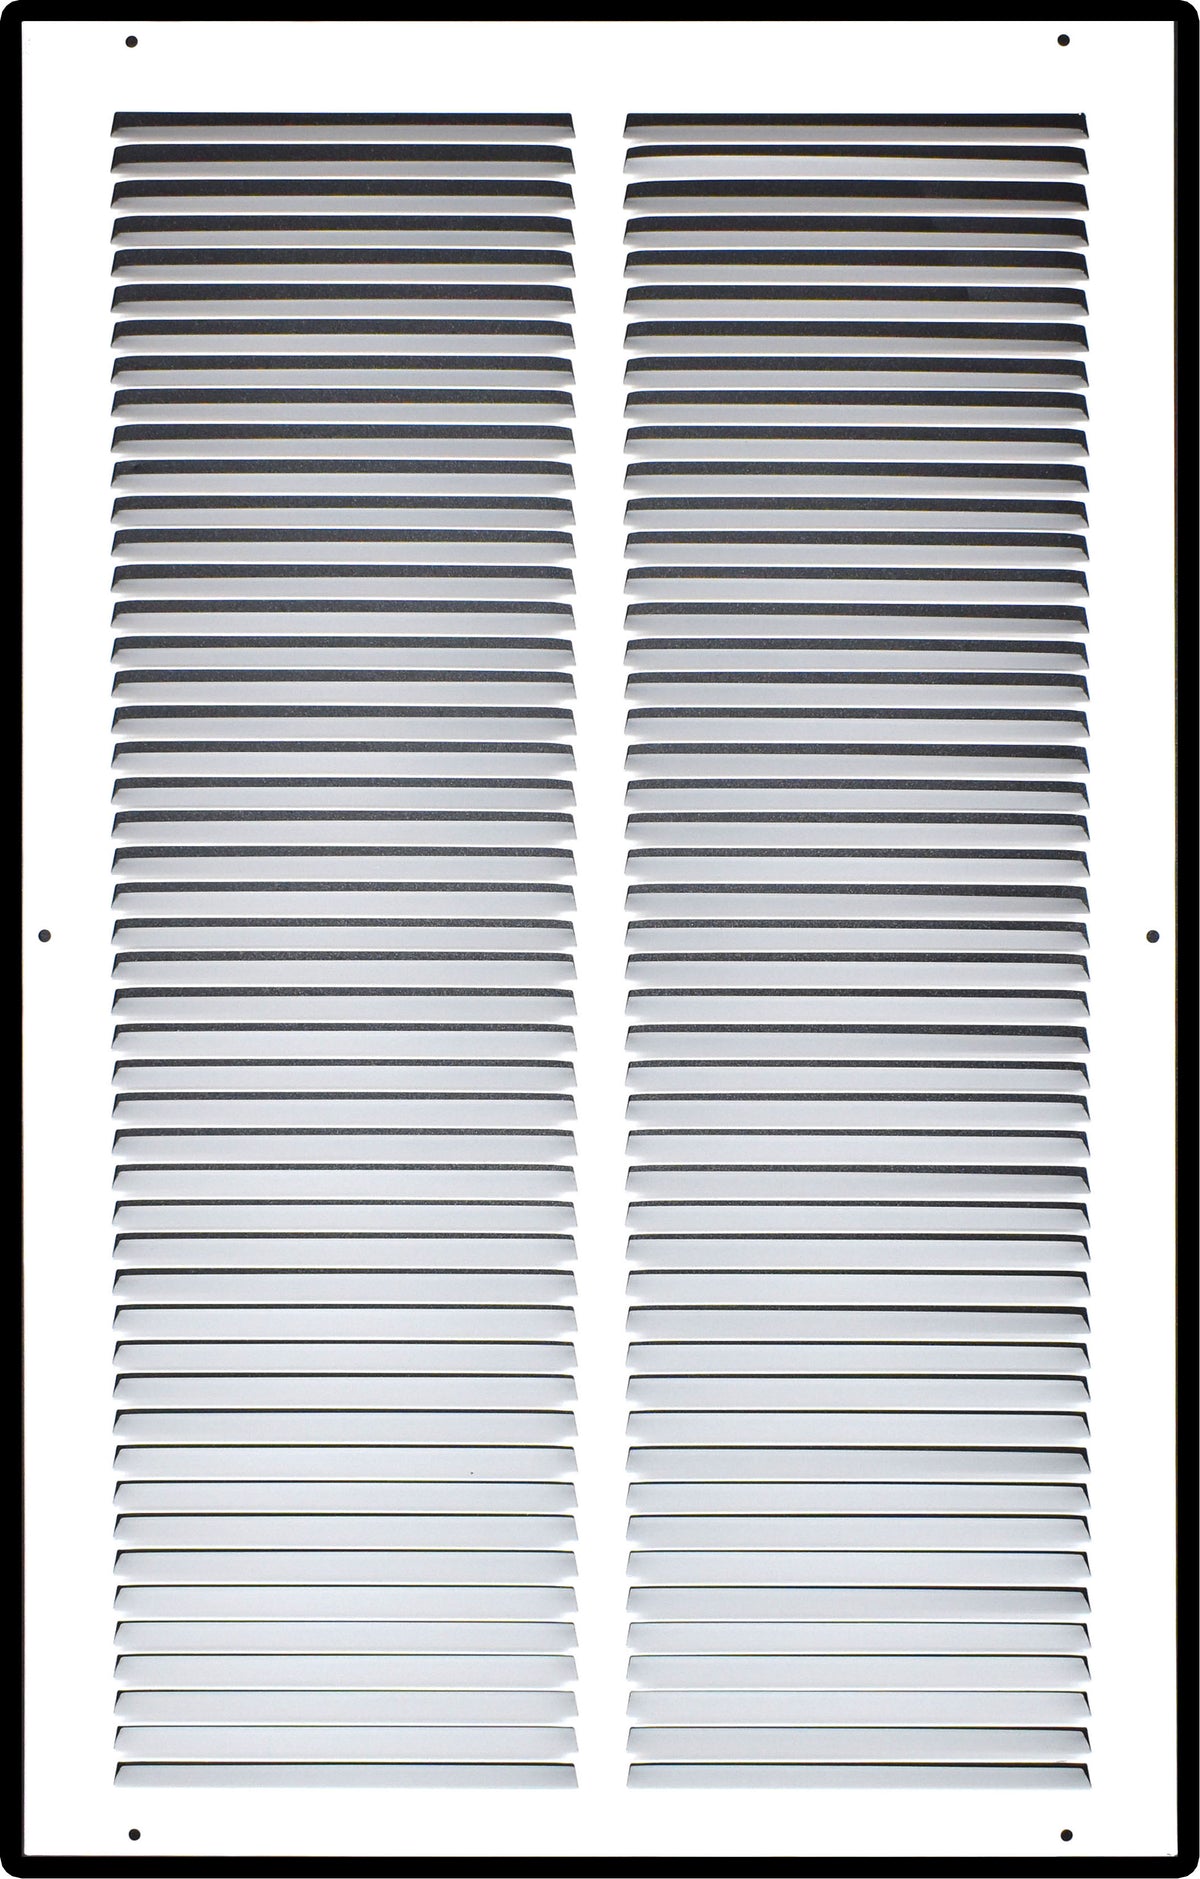 airgrilles 14" x 26" duct opening  -  steel return air grille for sidewall and ceiling hnd-flt-1rag-wh-14x26 756014647969 - 1